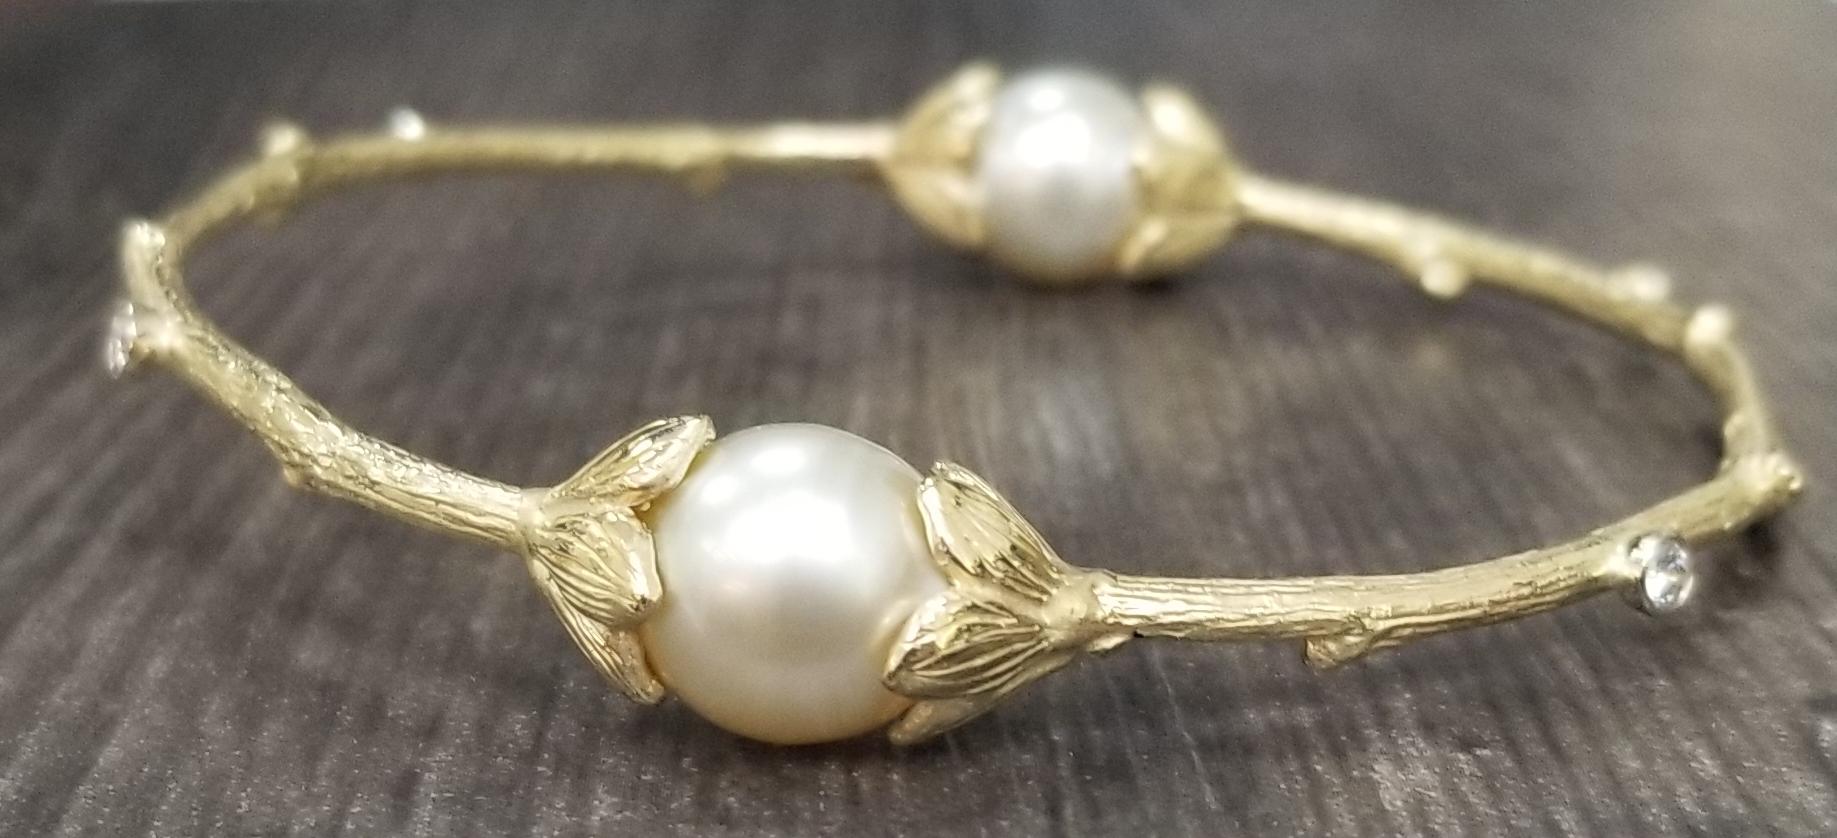 14k yellow gold Gresha signature bark bangle with 2 11mm south sea pearl and 4 round diamonds of fine quality weighing .36pts.  Get with other like bangles for stacking.
*this design is ours and can be created in any other form; ring, necklace,